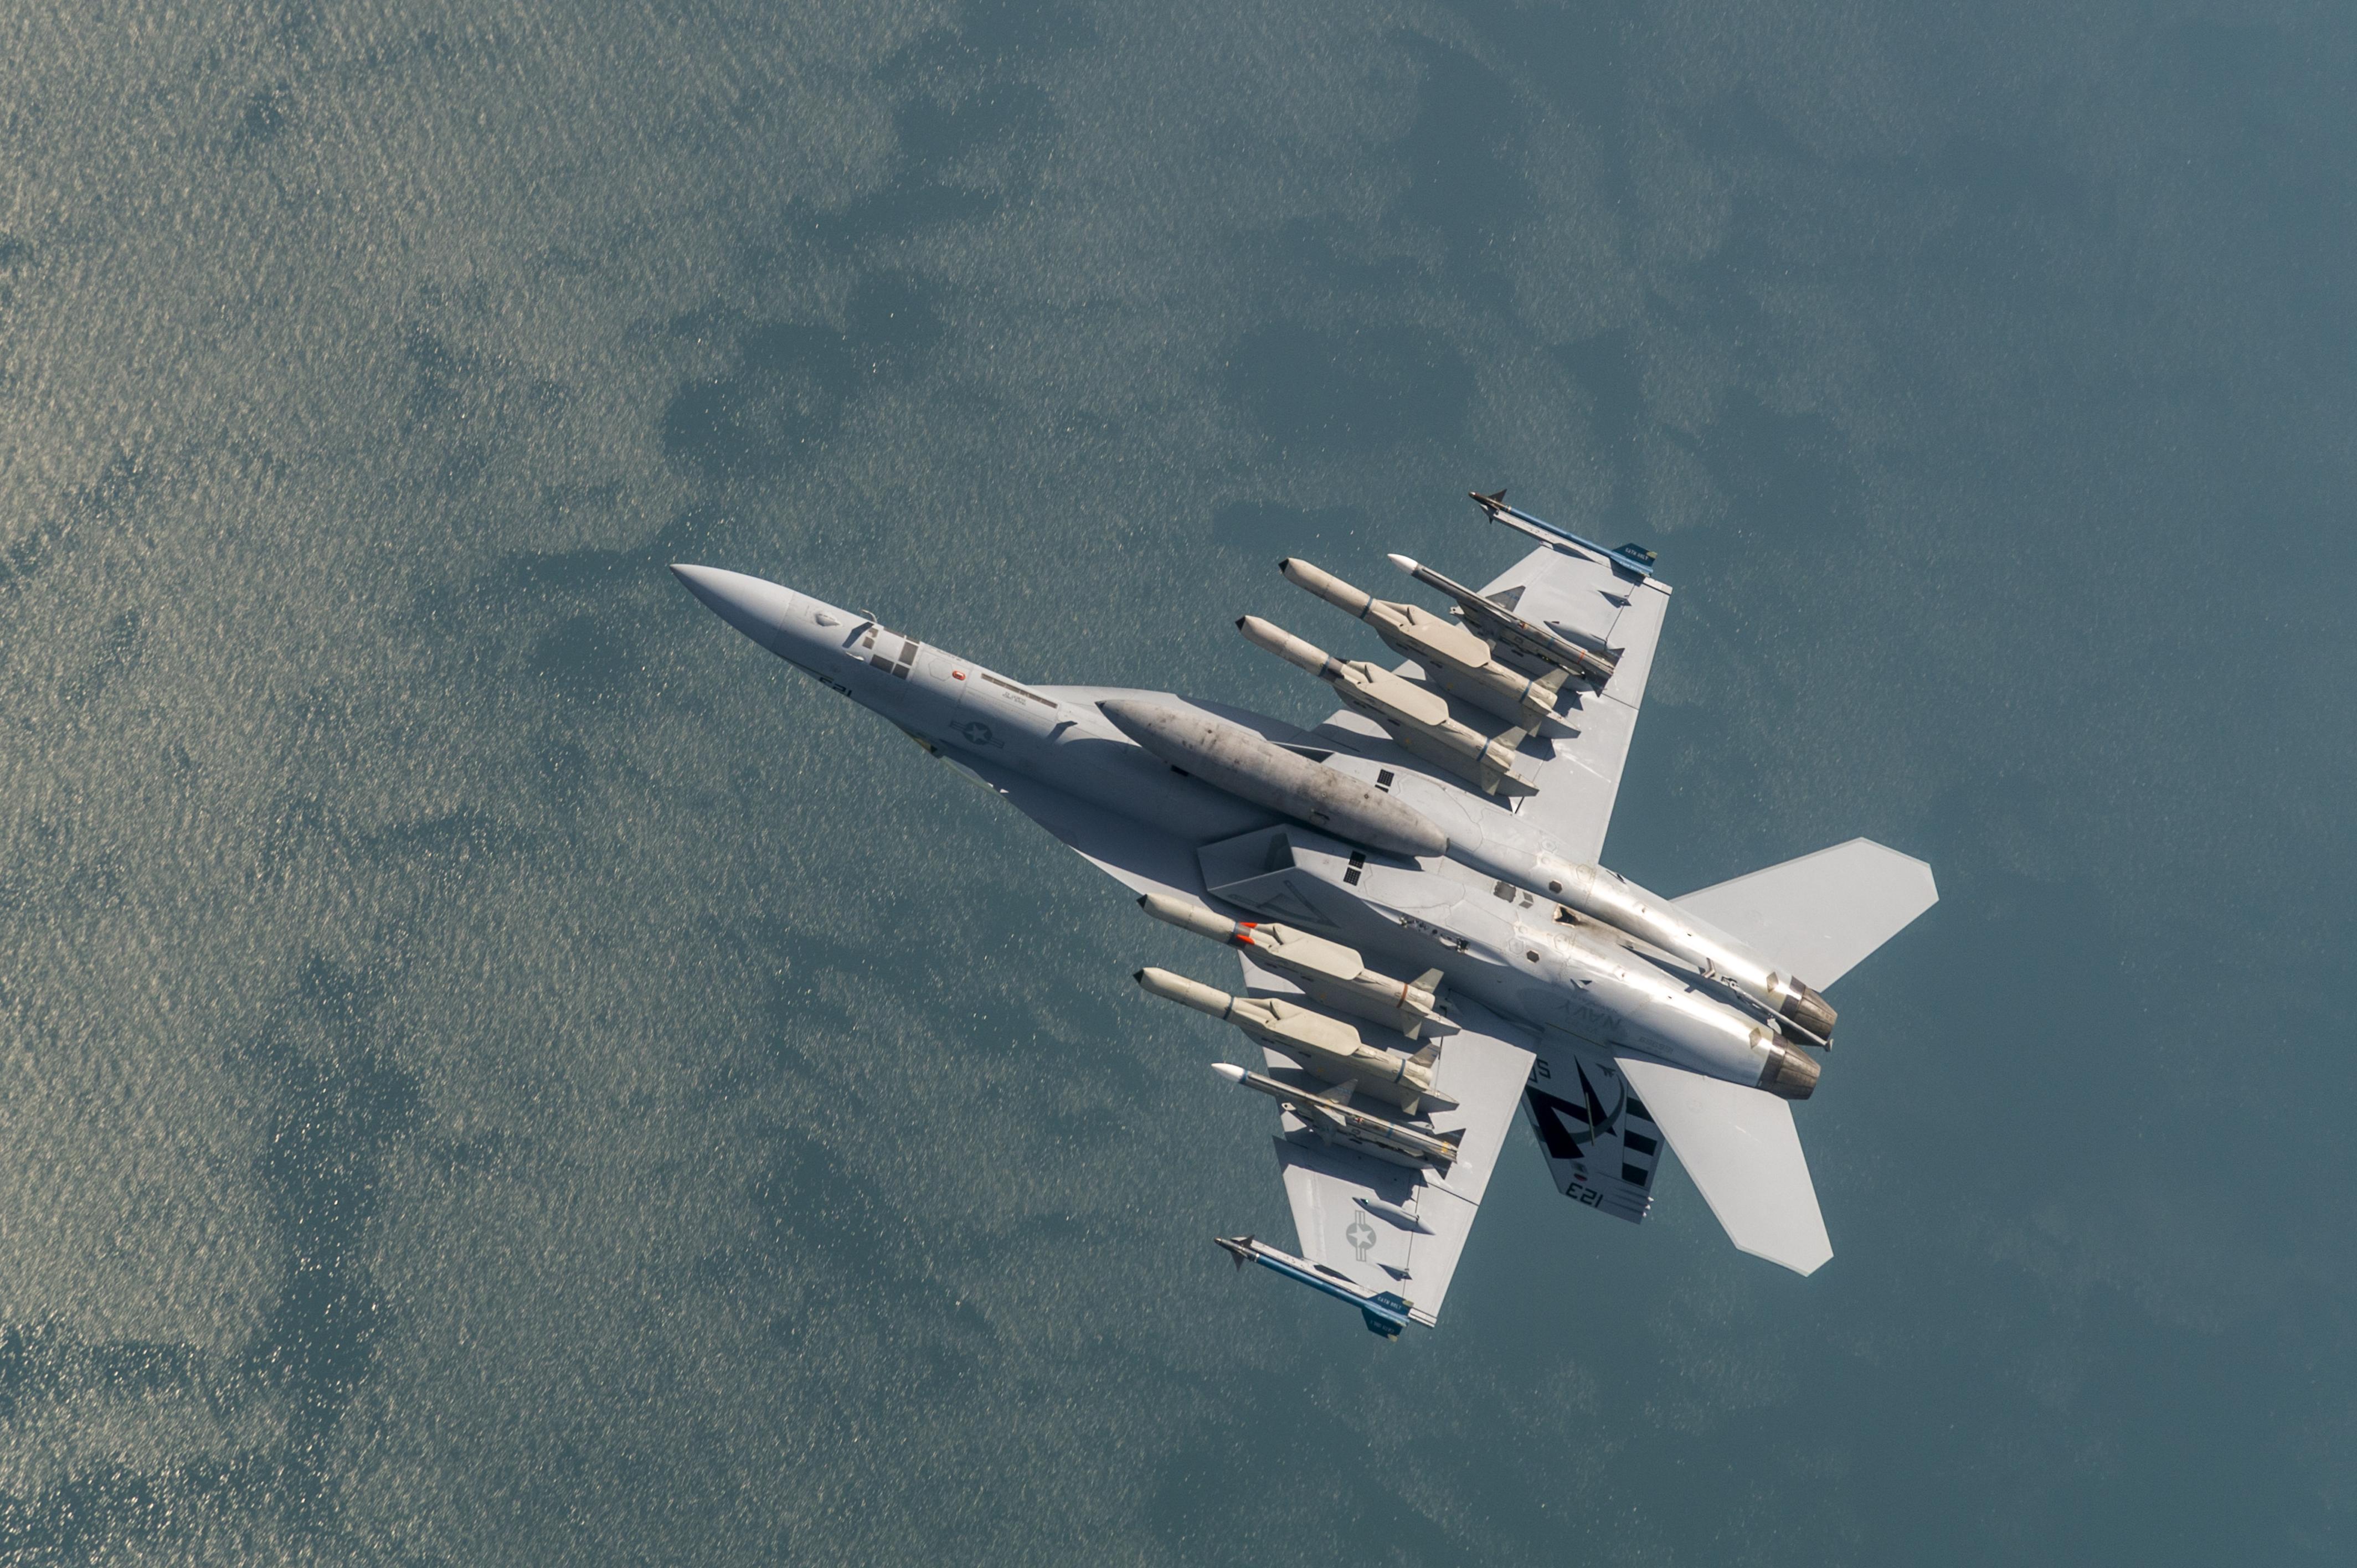 A weaponized F/A-18 flies over the Atlantic Ocean.